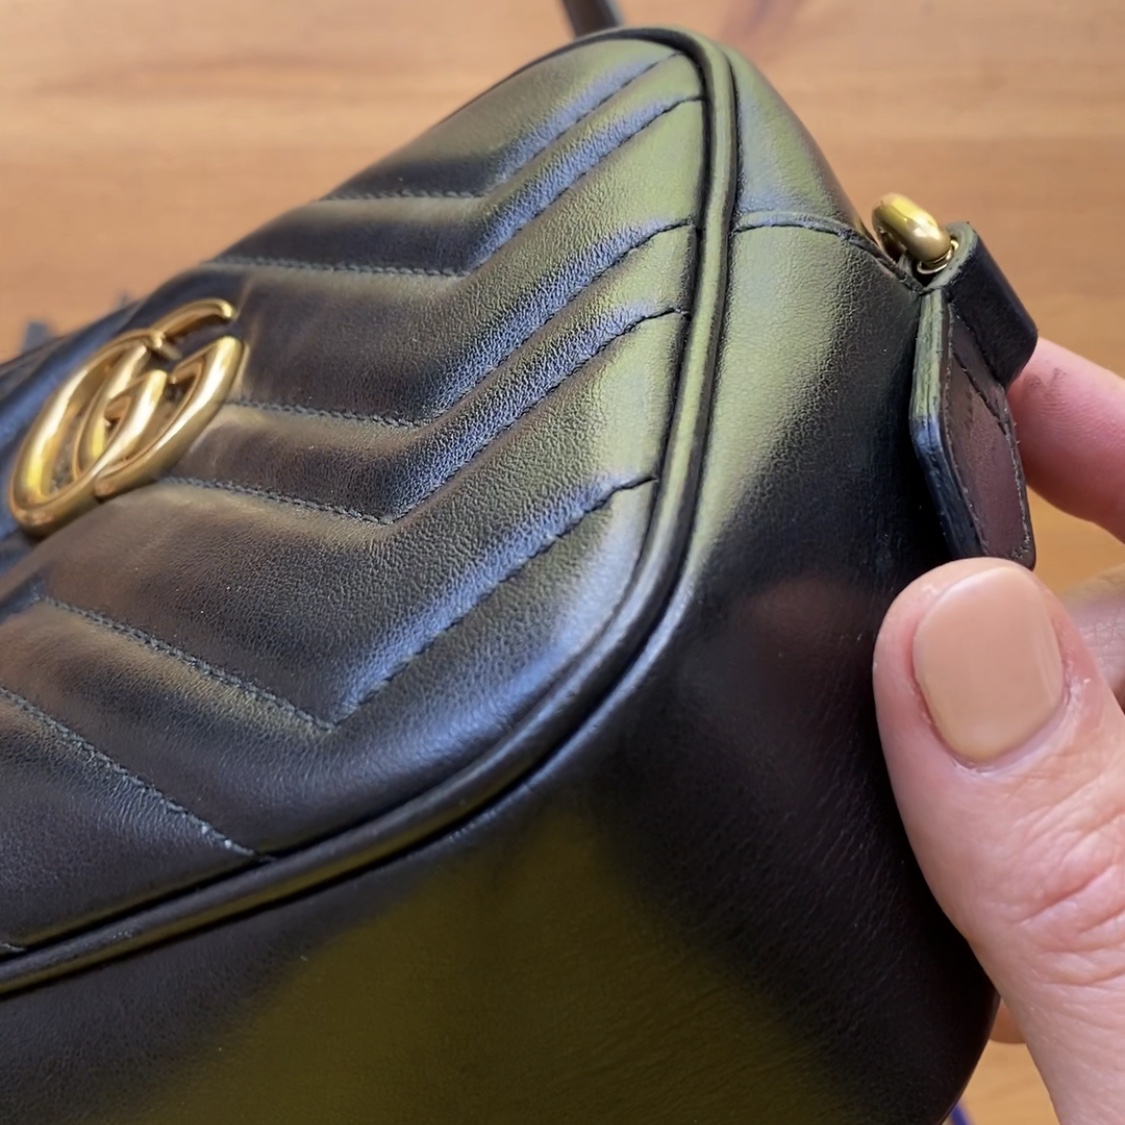 Unboxing. Gucci Marmont Small Crossbody Bag. @gucci #guccimarmont